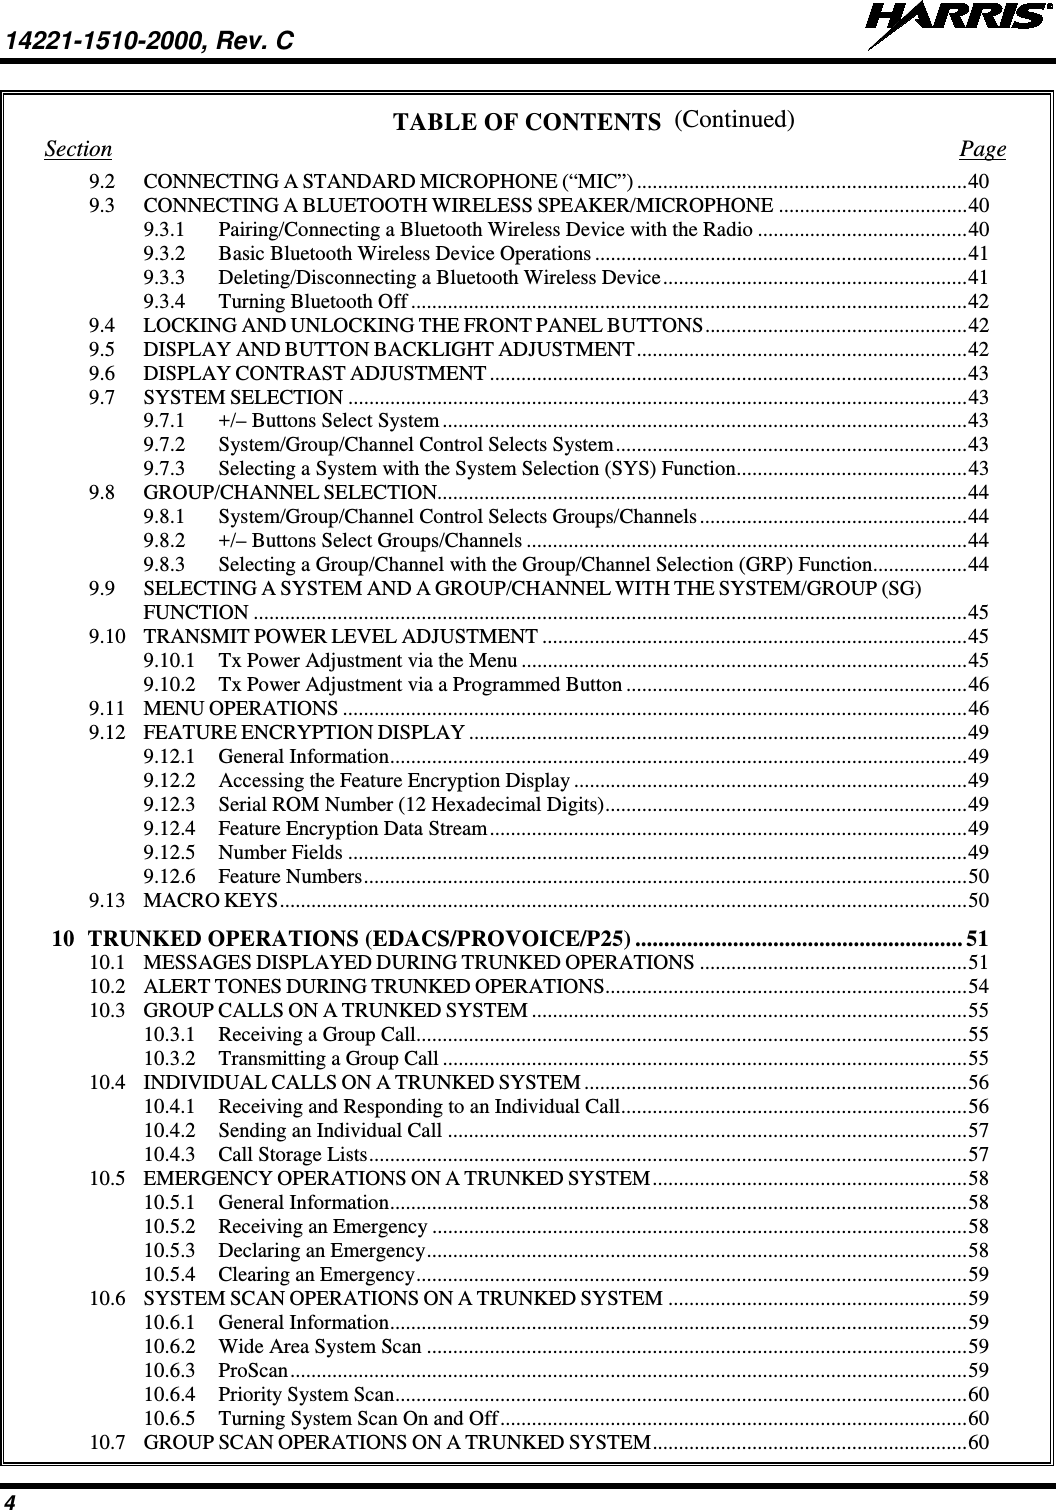 14221-1510-2000, Rev. C   4 (Continued) TABLE OF CONTENTS Section  Page 9.2 CONNECTING A STANDARD MICROPHONE (“MIC”) ............................................................... 40 9.3 CONNECTING A BLUETOOTH WIRELESS SPEAKER/MICROPHONE .................................... 40 9.3.1 Pairing/Connecting a Bluetooth Wireless Device with the Radio ........................................ 40 9.3.2 Basic Bluetooth Wireless Device Operations ....................................................................... 41 9.3.3 Deleting/Disconnecting a Bluetooth Wireless Device .......................................................... 41 9.3.4 Turning Bluetooth Off .......................................................................................................... 42 9.4 LOCKING AND UNLOCKING THE FRONT PANEL BUTTONS .................................................. 42 9.5 DISPLAY AND BUTTON BACKLIGHT ADJUSTMENT ............................................................... 42 9.6 DISPLAY CONTRAST ADJUSTMENT ........................................................................................... 43 9.7 SYSTEM SELECTION ...................................................................................................................... 43 9.7.1 +/– Buttons Select System .................................................................................................... 43 9.7.2 System/Group/Channel Control Selects System ................................................................... 43 9.7.3 Selecting a System with the System Selection (SYS) Function ............................................ 43 9.8 GROUP/CHANNEL SELECTION..................................................................................................... 44 9.8.1 System/Group/Channel Control Selects Groups/Channels ................................................... 44 9.8.2 +/– Buttons Select Groups/Channels .................................................................................... 44 9.8.3 Selecting a Group/Channel with the Group/Channel Selection (GRP) Function .................. 44 9.9 SELECTING A SYSTEM AND A GROUP/CHANNEL WITH THE SYSTEM/GROUP (SG) FUNCTION ........................................................................................................................................ 45 9.10 TRANSMIT POWER LEVEL ADJUSTMENT ................................................................................. 45 9.10.1 Tx Power Adjustment via the Menu ..................................................................................... 45 9.10.2 Tx Power Adjustment via a Programmed Button ................................................................. 46 9.11 MENU OPERATIONS ....................................................................................................................... 46 9.12 FEATURE ENCRYPTION DISPLAY ............................................................................................... 49 9.12.1 General Information .............................................................................................................. 49 9.12.2 Accessing the Feature Encryption Display ........................................................................... 49 9.12.3 Serial ROM Number (12 Hexadecimal Digits) ..................................................................... 49 9.12.4 Feature Encryption Data Stream ........................................................................................... 49 9.12.5 Number Fields ...................................................................................................................... 49 9.12.6 Feature Numbers ................................................................................................................... 50 9.13 MACRO KEYS ................................................................................................................................... 50 10 TRUNKED OPERATIONS (EDACS/PROVOICE/P25) ......................................................... 51 10.1 MESSAGES DISPLAYED DURING TRUNKED OPERATIONS ................................................... 51 10.2 ALERT TONES DURING TRUNKED OPERATIONS ..................................................................... 54 10.3 GROUP CALLS ON A TRUNKED SYSTEM ................................................................................... 55 10.3.1 Receiving a Group Call ......................................................................................................... 55 10.3.2 Transmitting a Group Call .................................................................................................... 55 10.4 INDIVIDUAL CALLS ON A TRUNKED SYSTEM ......................................................................... 56 10.4.1 Receiving and Responding to an Individual Call .................................................................. 56 10.4.2 Sending an Individual Call ................................................................................................... 57 10.4.3 Call Storage Lists .................................................................................................................. 57 10.5 EMERGENCY OPERATIONS ON A TRUNKED SYSTEM ............................................................ 58 10.5.1 General Information .............................................................................................................. 58 10.5.2 Receiving an Emergency ...................................................................................................... 58 10.5.3 Declaring an Emergency ....................................................................................................... 58 10.5.4 Clearing an Emergency ......................................................................................................... 59 10.6 SYSTEM SCAN OPERATIONS ON A TRUNKED SYSTEM ......................................................... 59 10.6.1 General Information .............................................................................................................. 59 10.6.2 Wide Area System Scan ....................................................................................................... 59 10.6.3 ProScan ................................................................................................................................. 59 10.6.4 Priority System Scan ............................................................................................................. 60 10.6.5 Turning System Scan On and Off ......................................................................................... 60 10.7 GROUP SCAN OPERATIONS ON A TRUNKED SYSTEM ............................................................ 60 